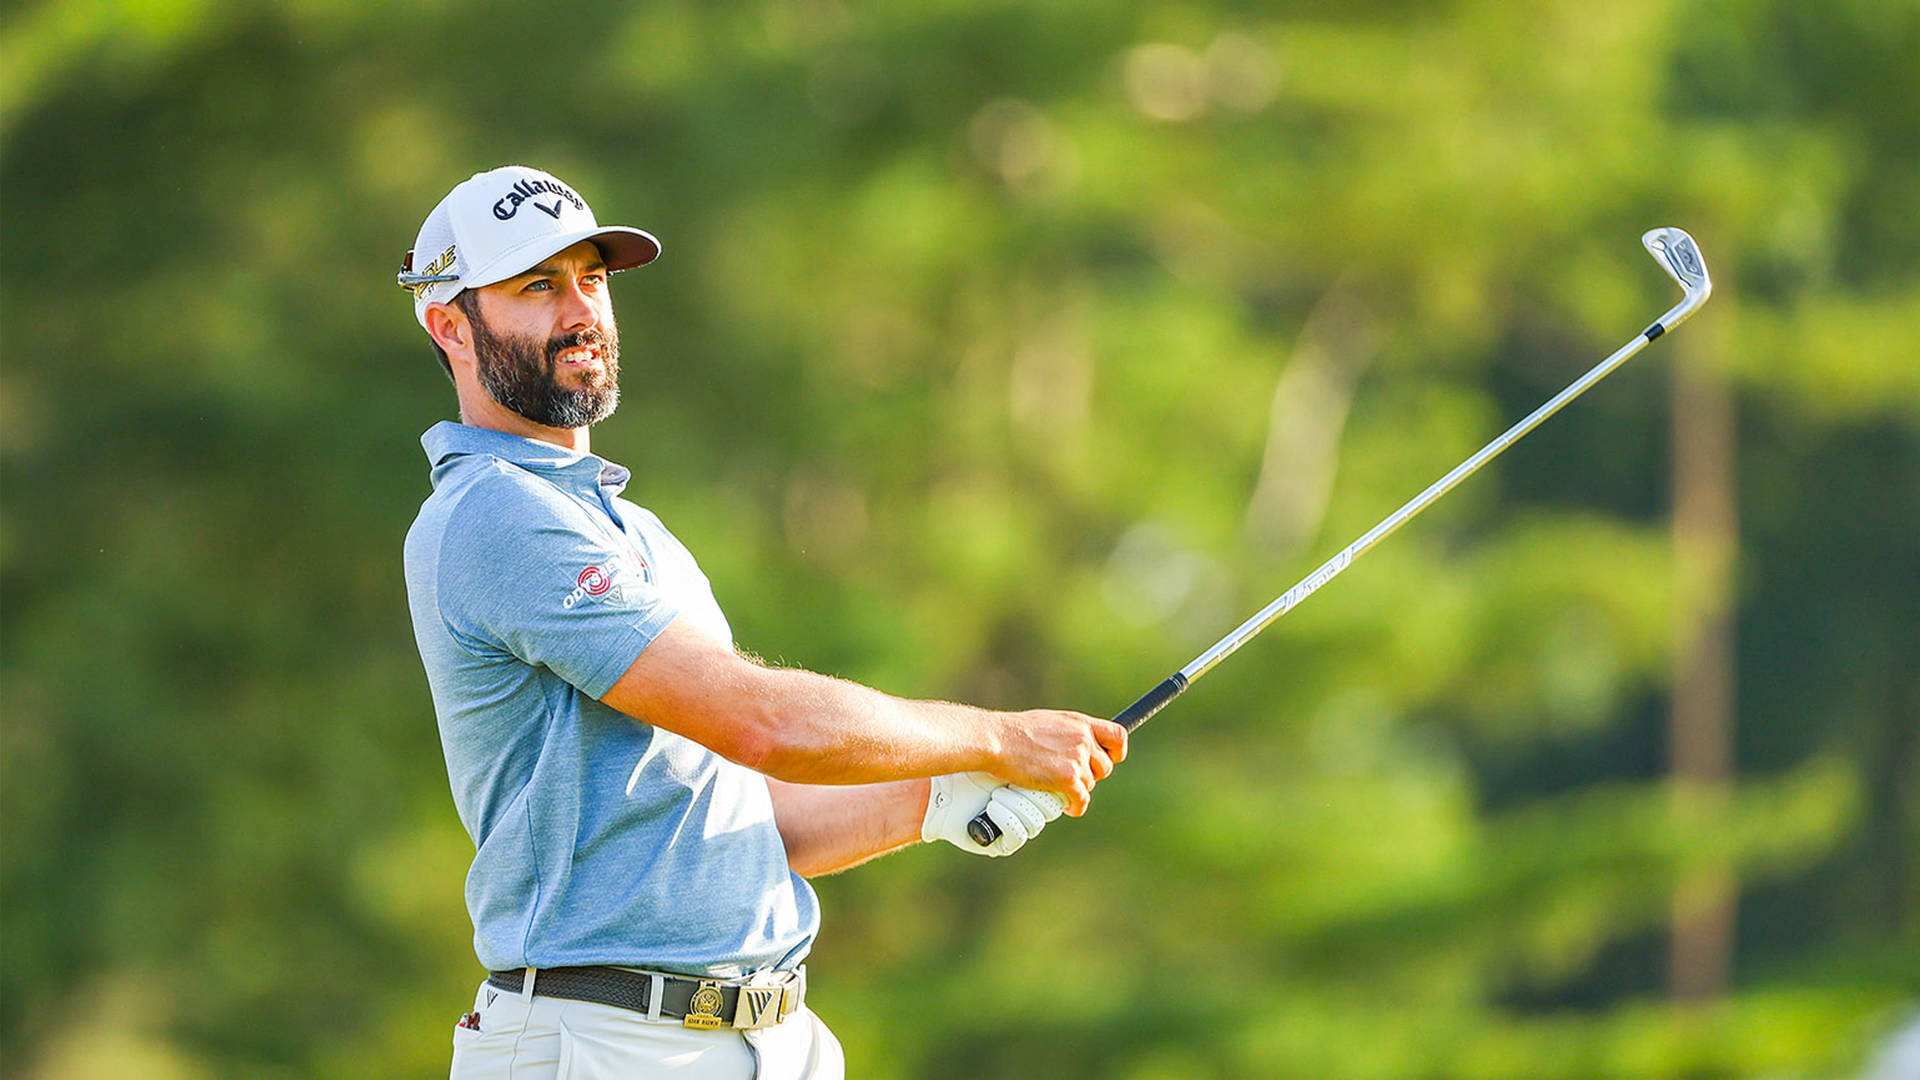 Adam Hadwin In Action During The Golf Tournament Wallpaper